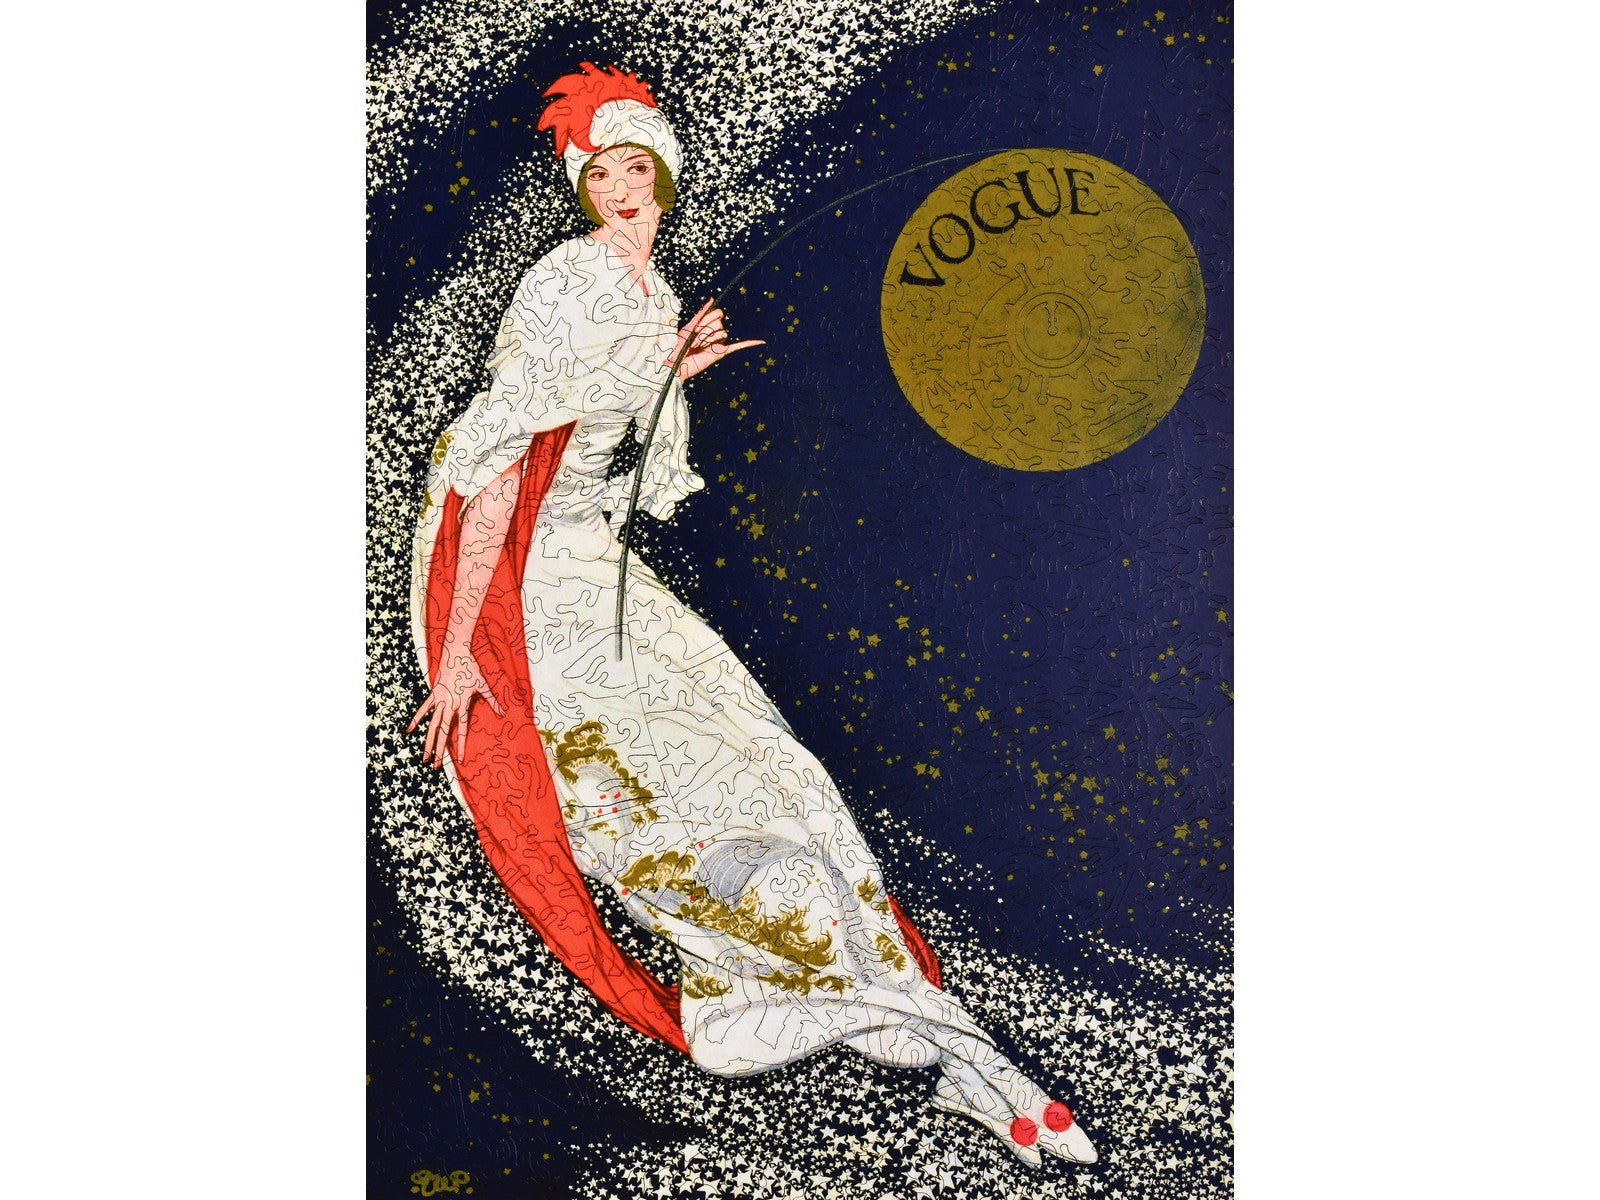 The front of the puzzle, Vogue 1912, with a woman celebrating new years.